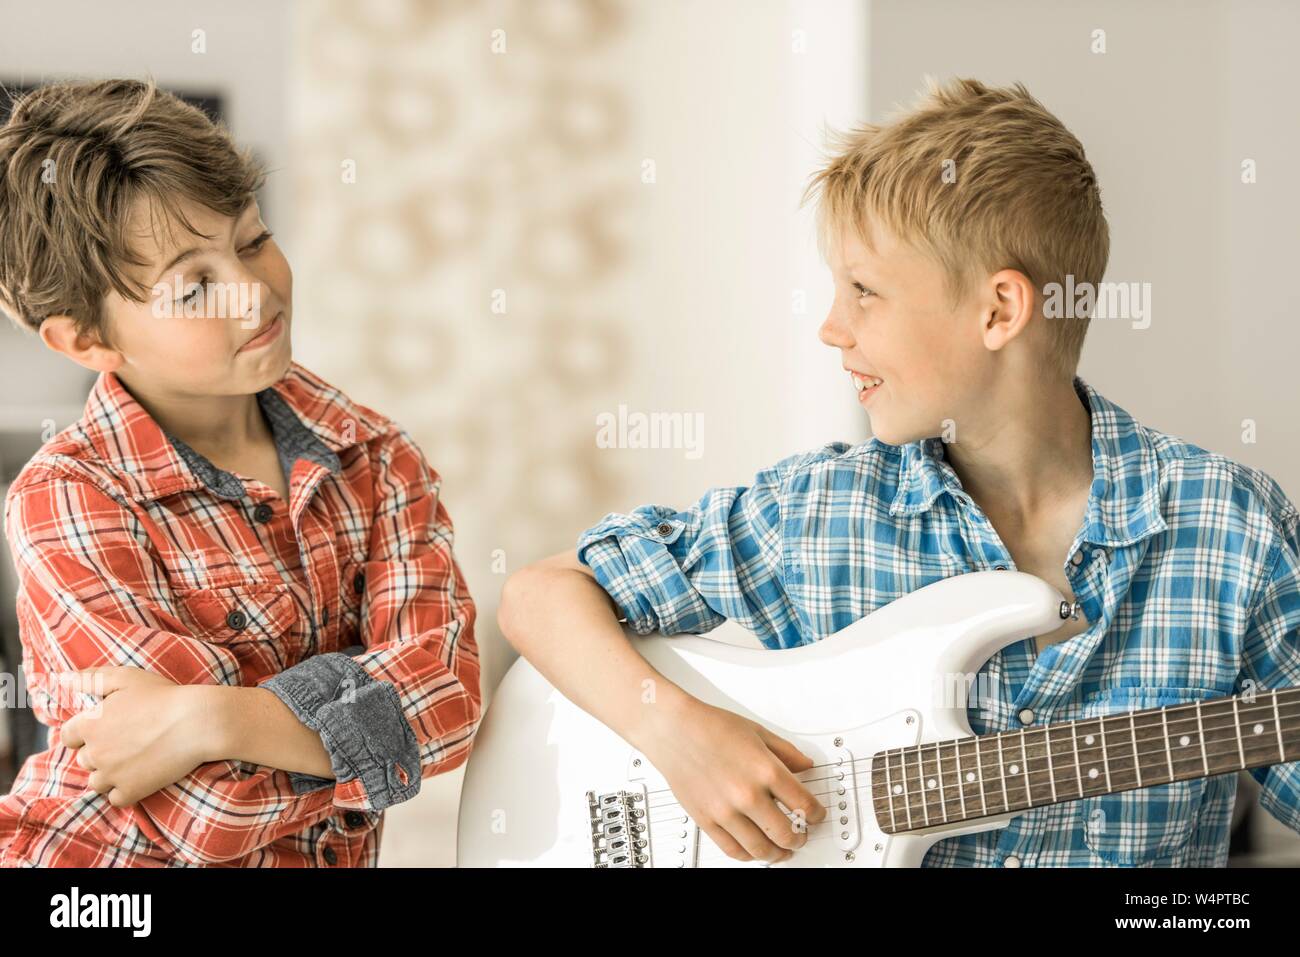 Two boys, friends, 10 years old, one plays electric guitar, smiling, Germany Stock Photo